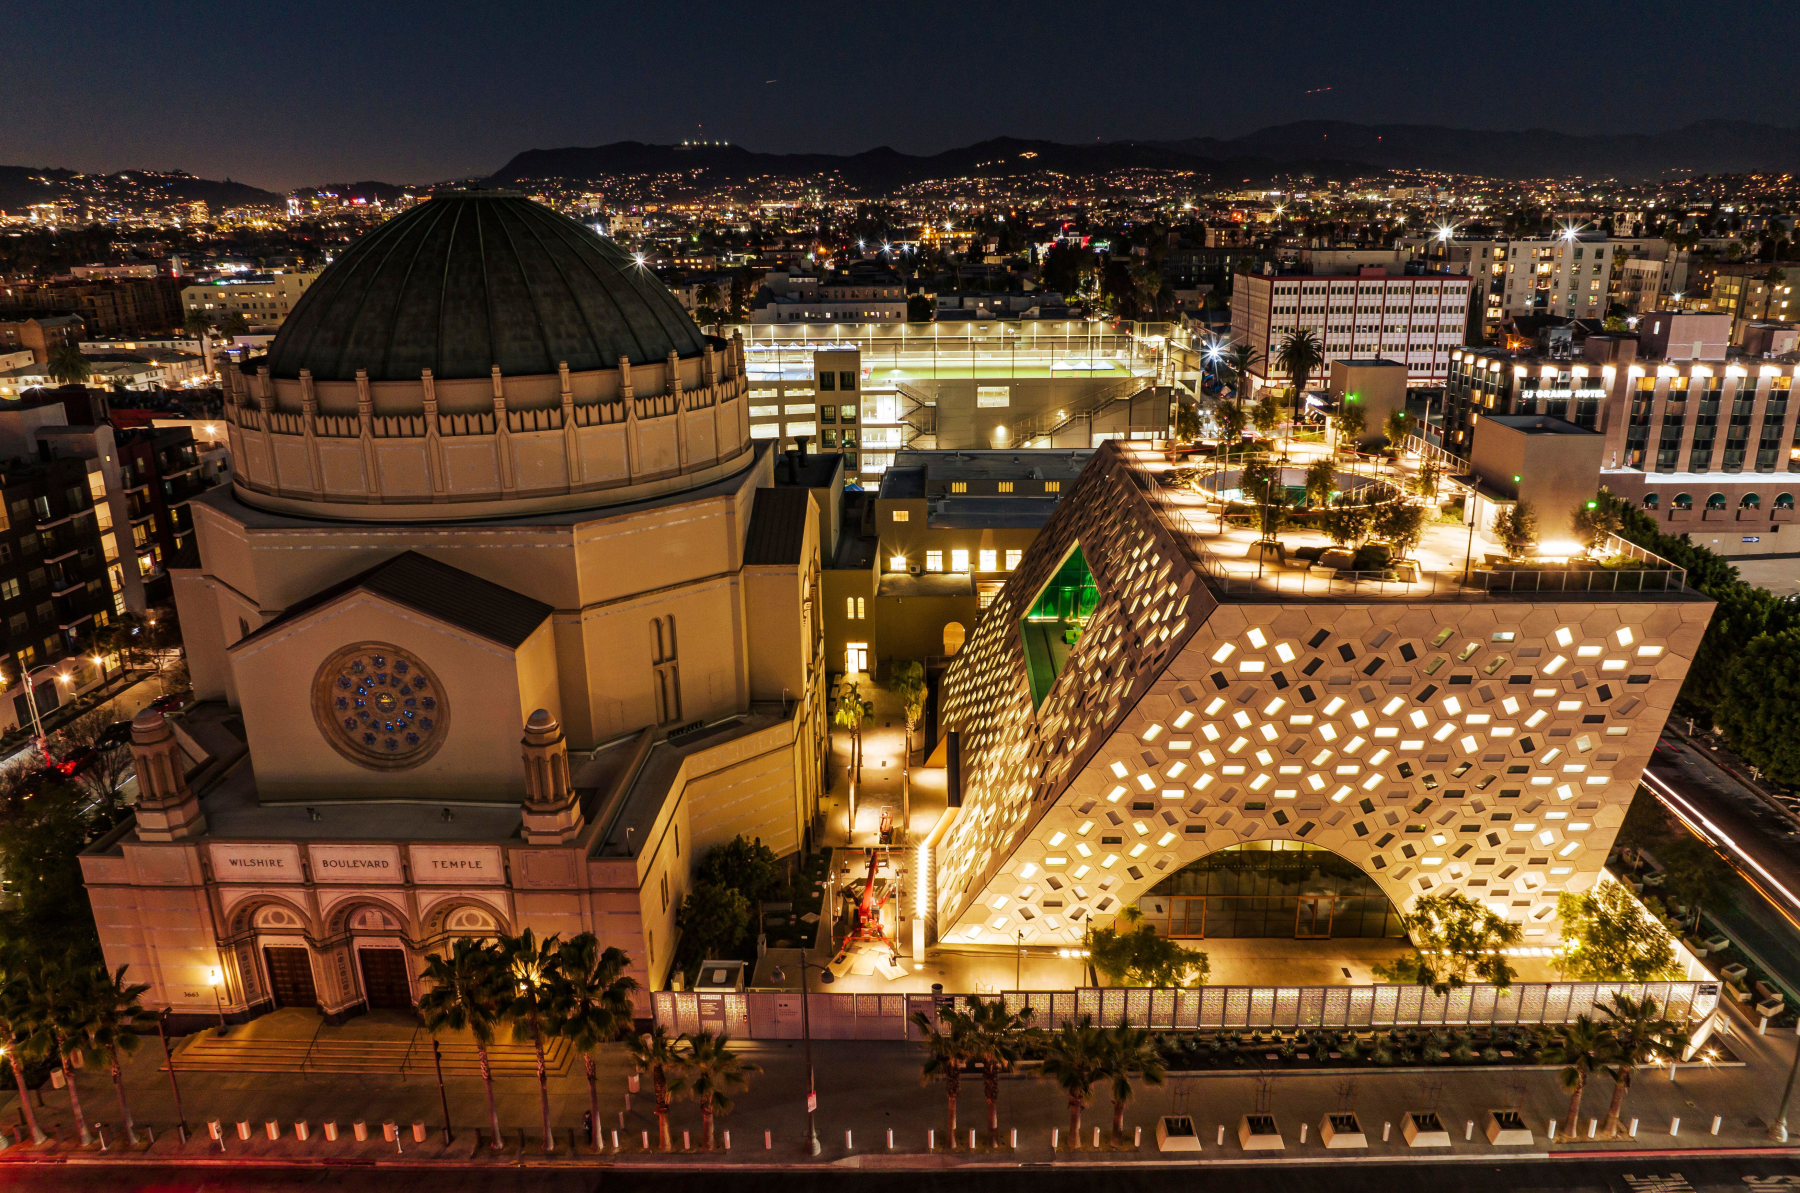 The Wilshire Boulevard Temple featuring the 2022 angular addition, the Audrey Irmas Pavilion designed by Shohei Shigematsu, photo by Ted Soqui, Sipa USA/Alamy Live News. 
